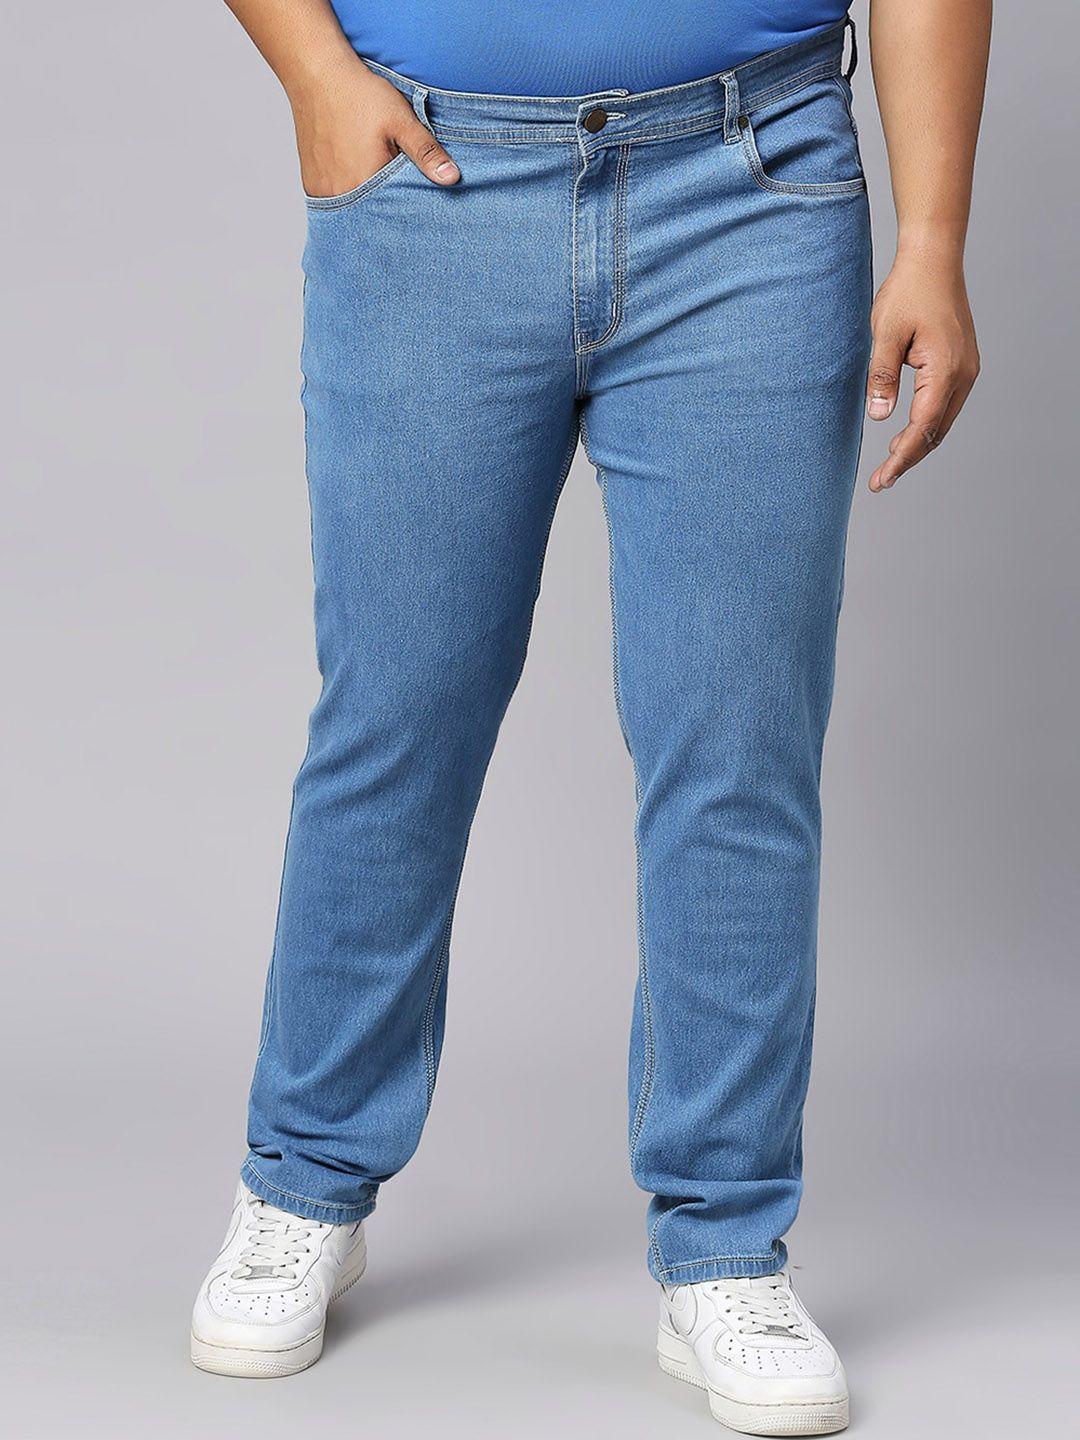 hj-hasasi-men-plus-size-clean-look-stretchable-jeans